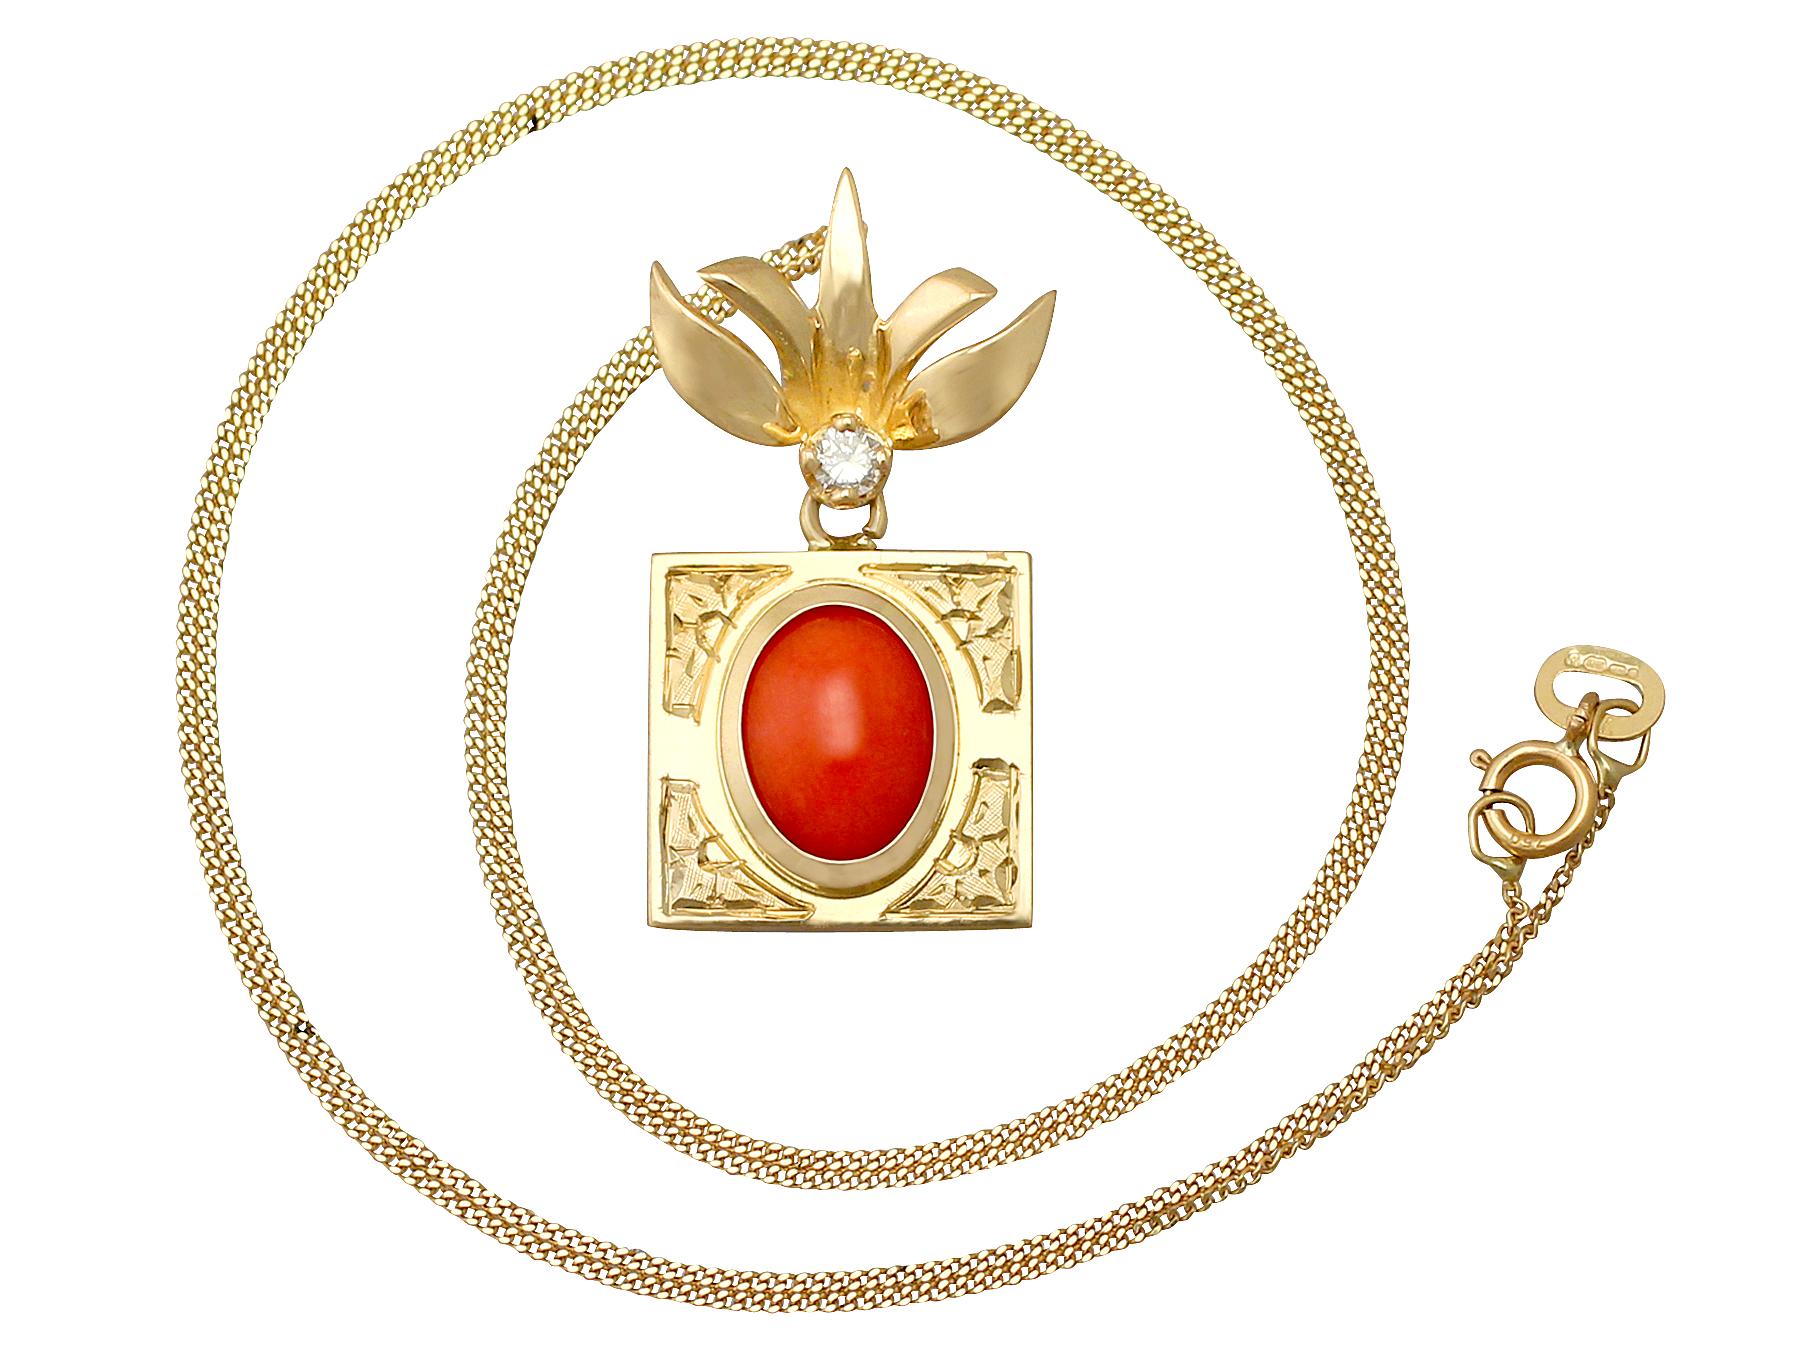 A fine and impressive red coral and 0.03 carat diamond, 18k yellow gold pendant; part of our diverse vintage jewelry and estate jewelry collections.

This fine and impressive cabochon cut coral and diamond pendant has been crafted in 18k yellow